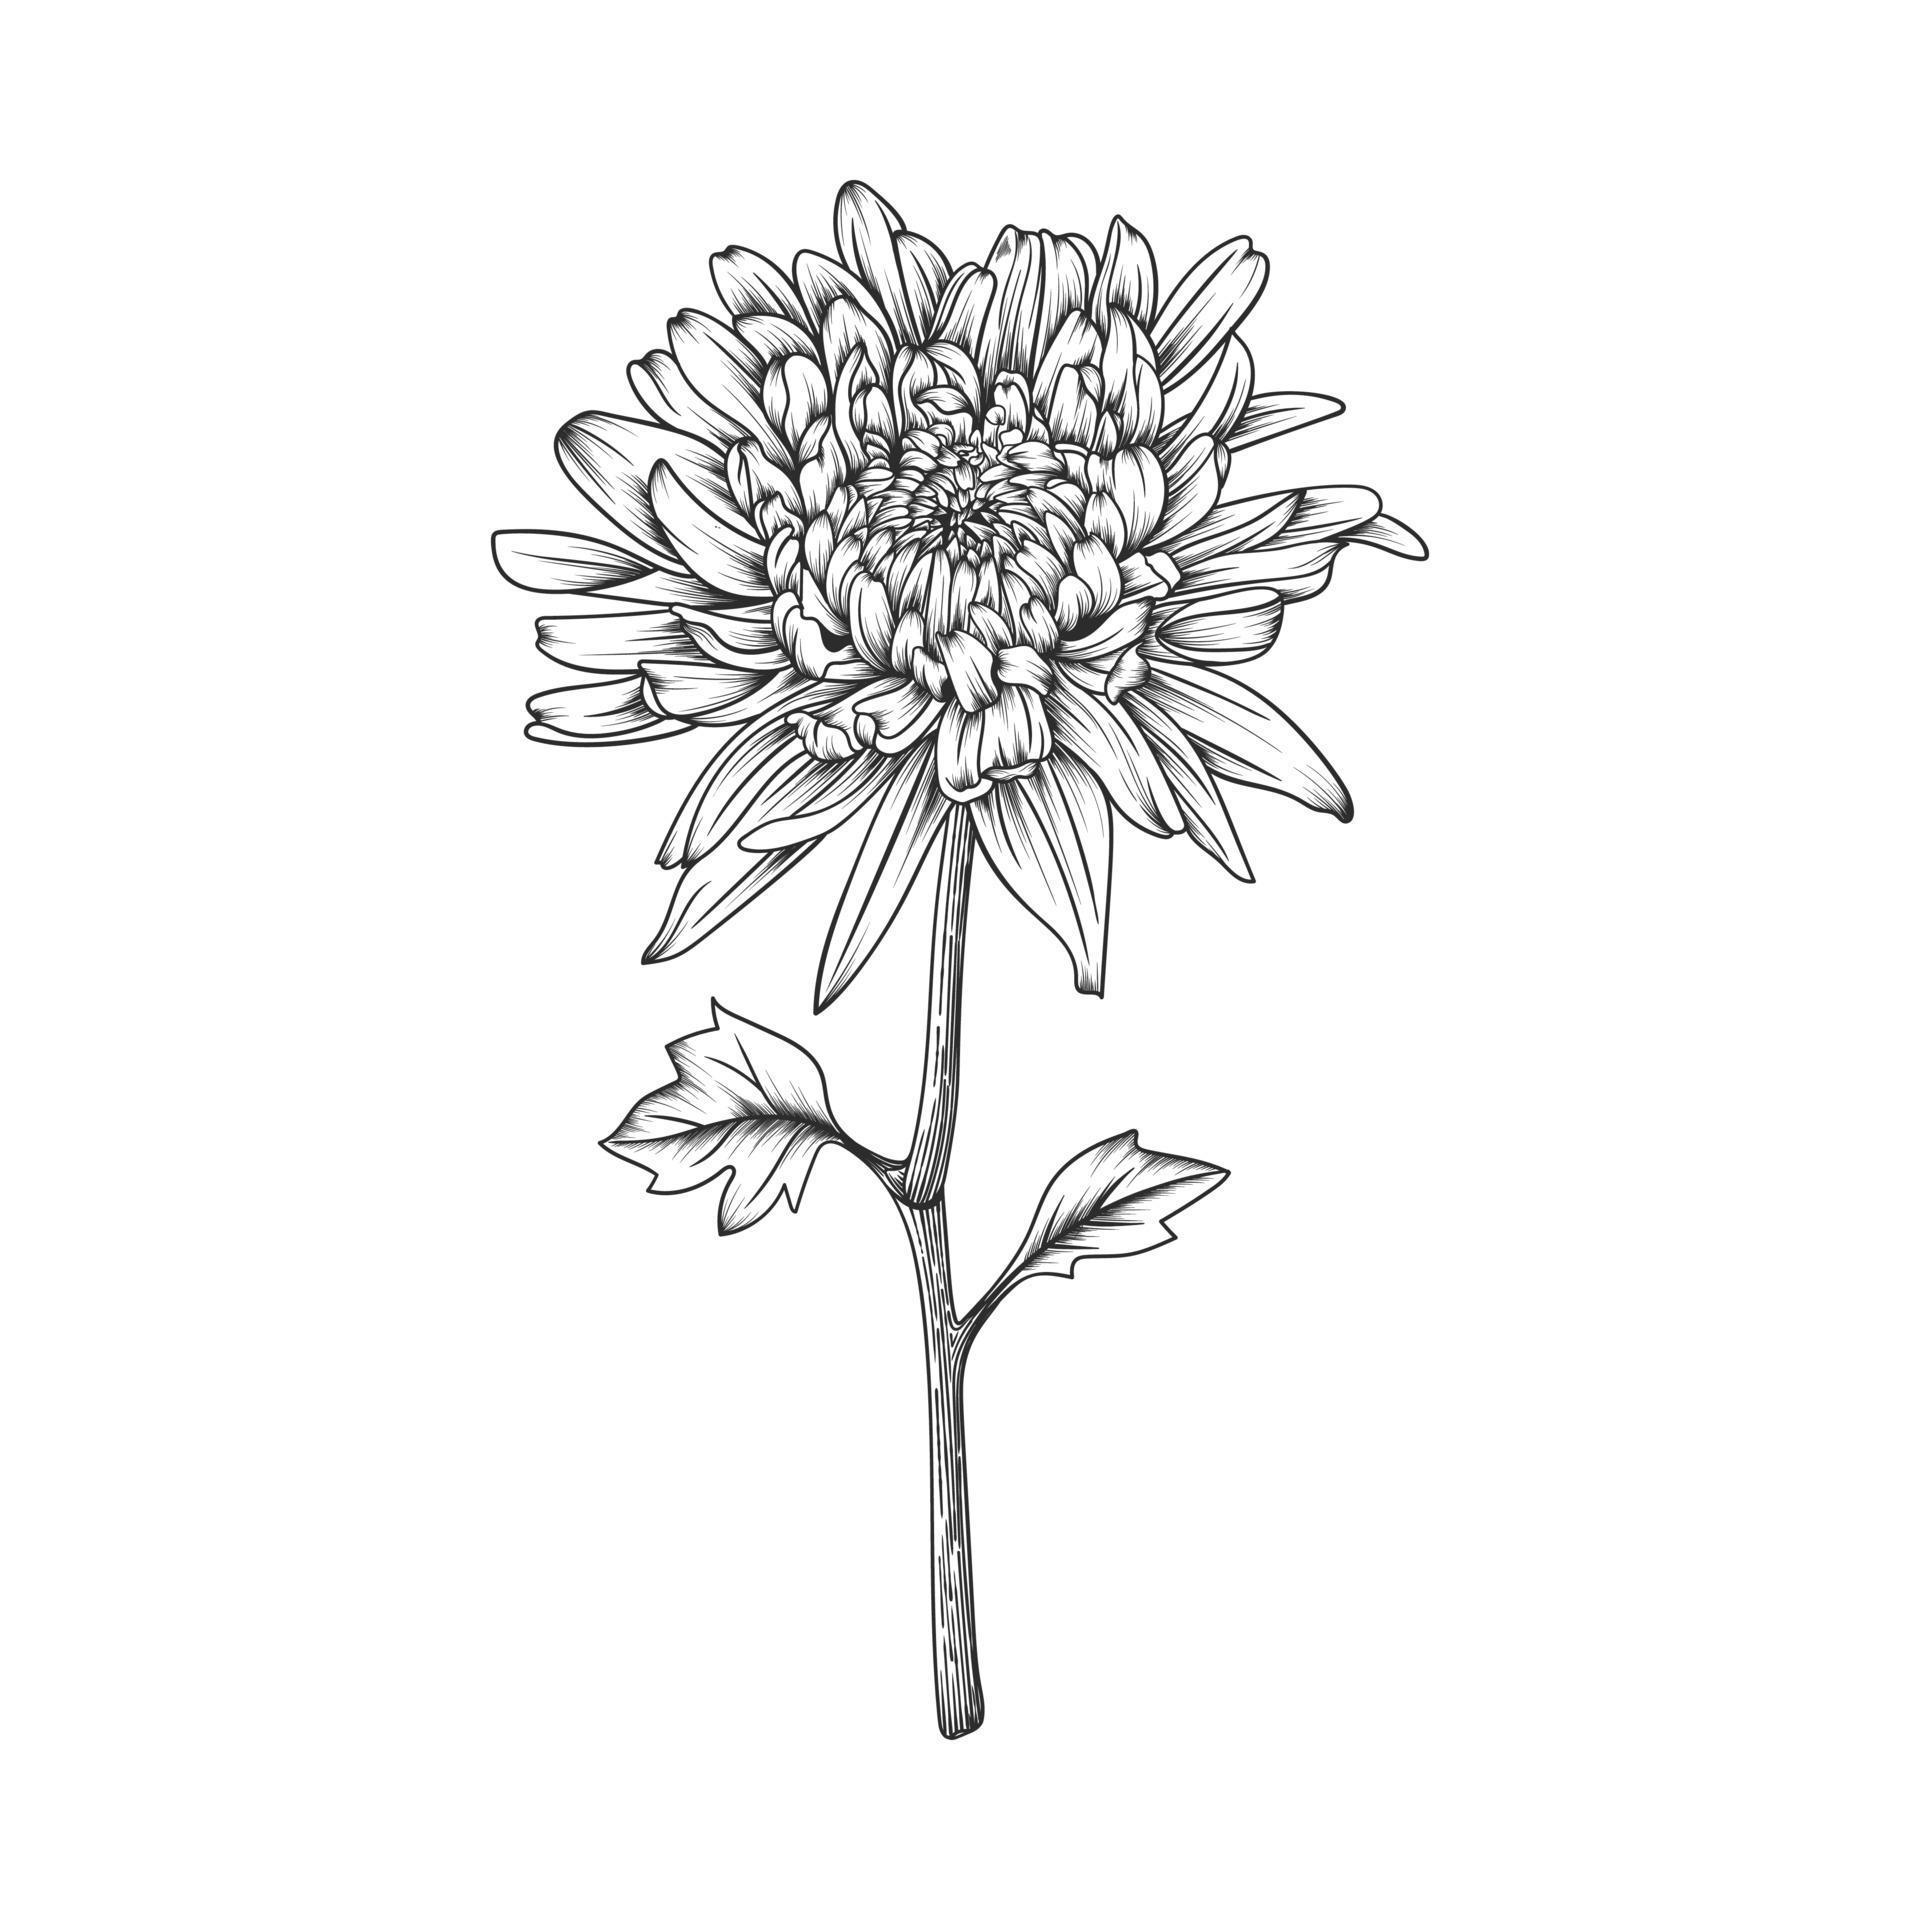 Hand drawn chrysanthemum flower and leaves drawing illustration ...